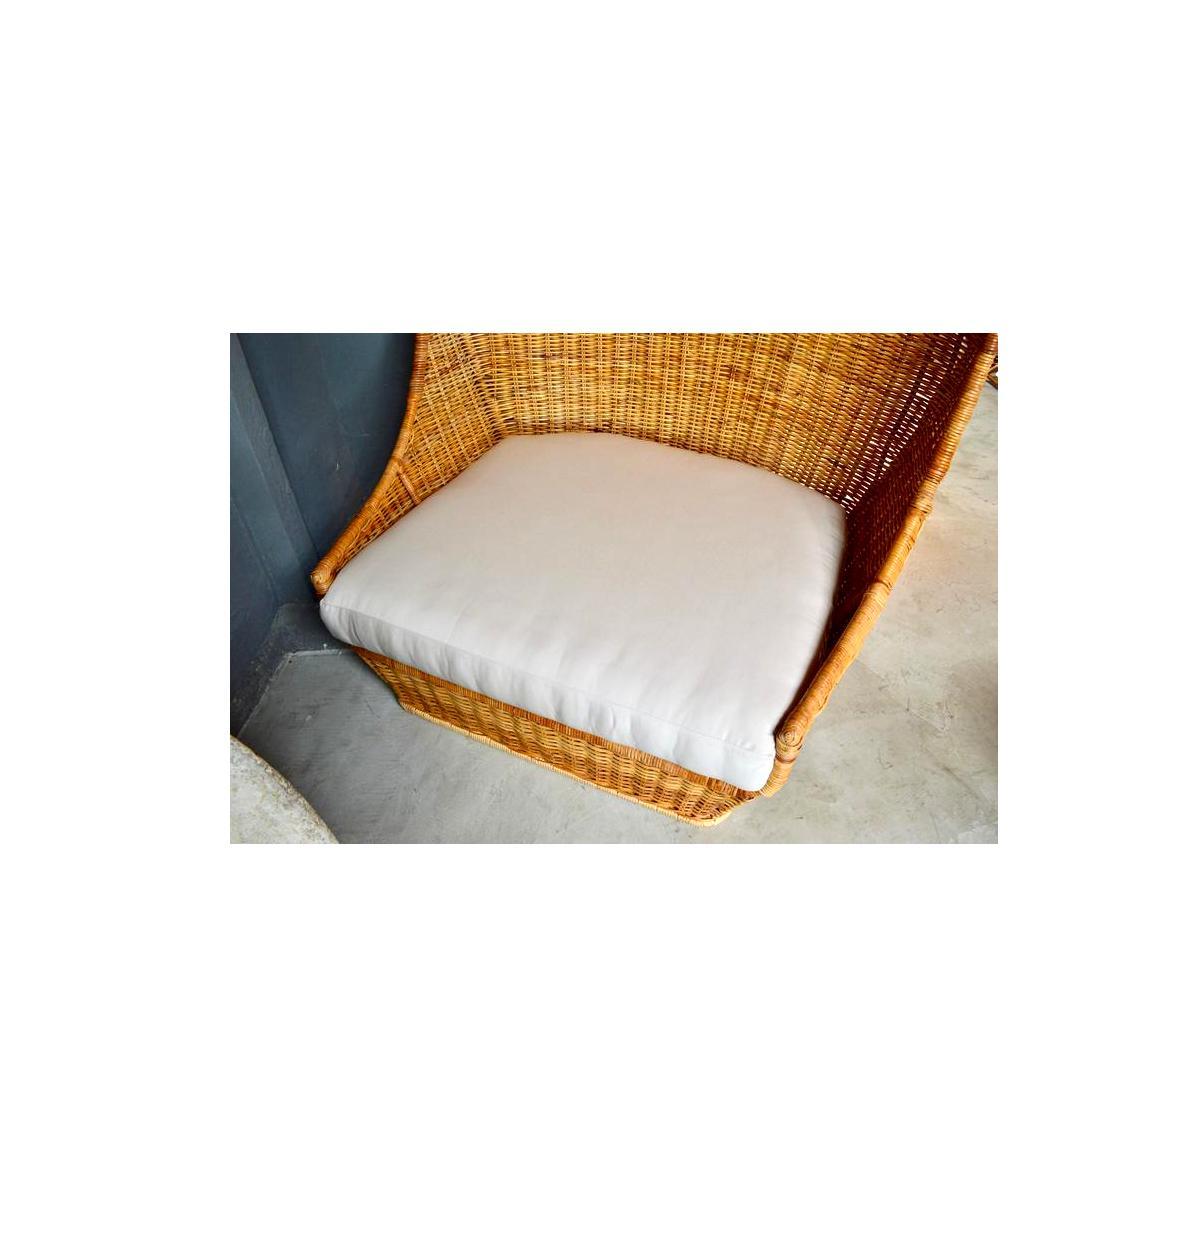 Fabric Massive Hooded Rattan Canopy Chair or Loveseat For Sale